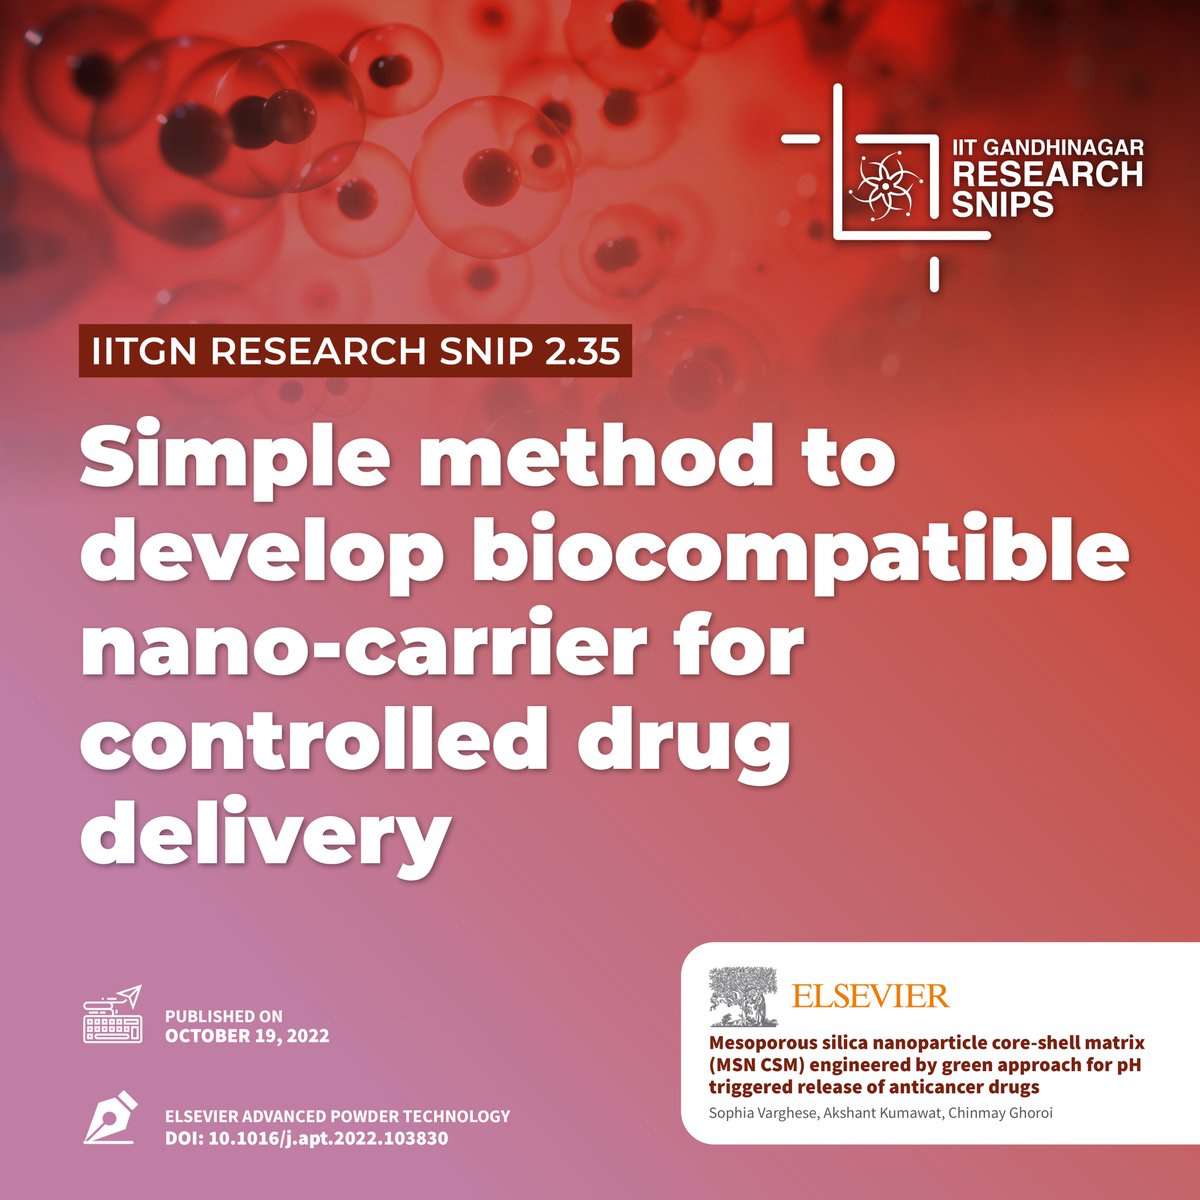 #IITGNResearchSnip 2.35: Nano-carriers are tiny structures that play a crucial role in controlled release of #AnticancerDrugs. There are different types of nano-carriers, but they often have limitations. Some are not stable, while others are complex to make and can be toxic.